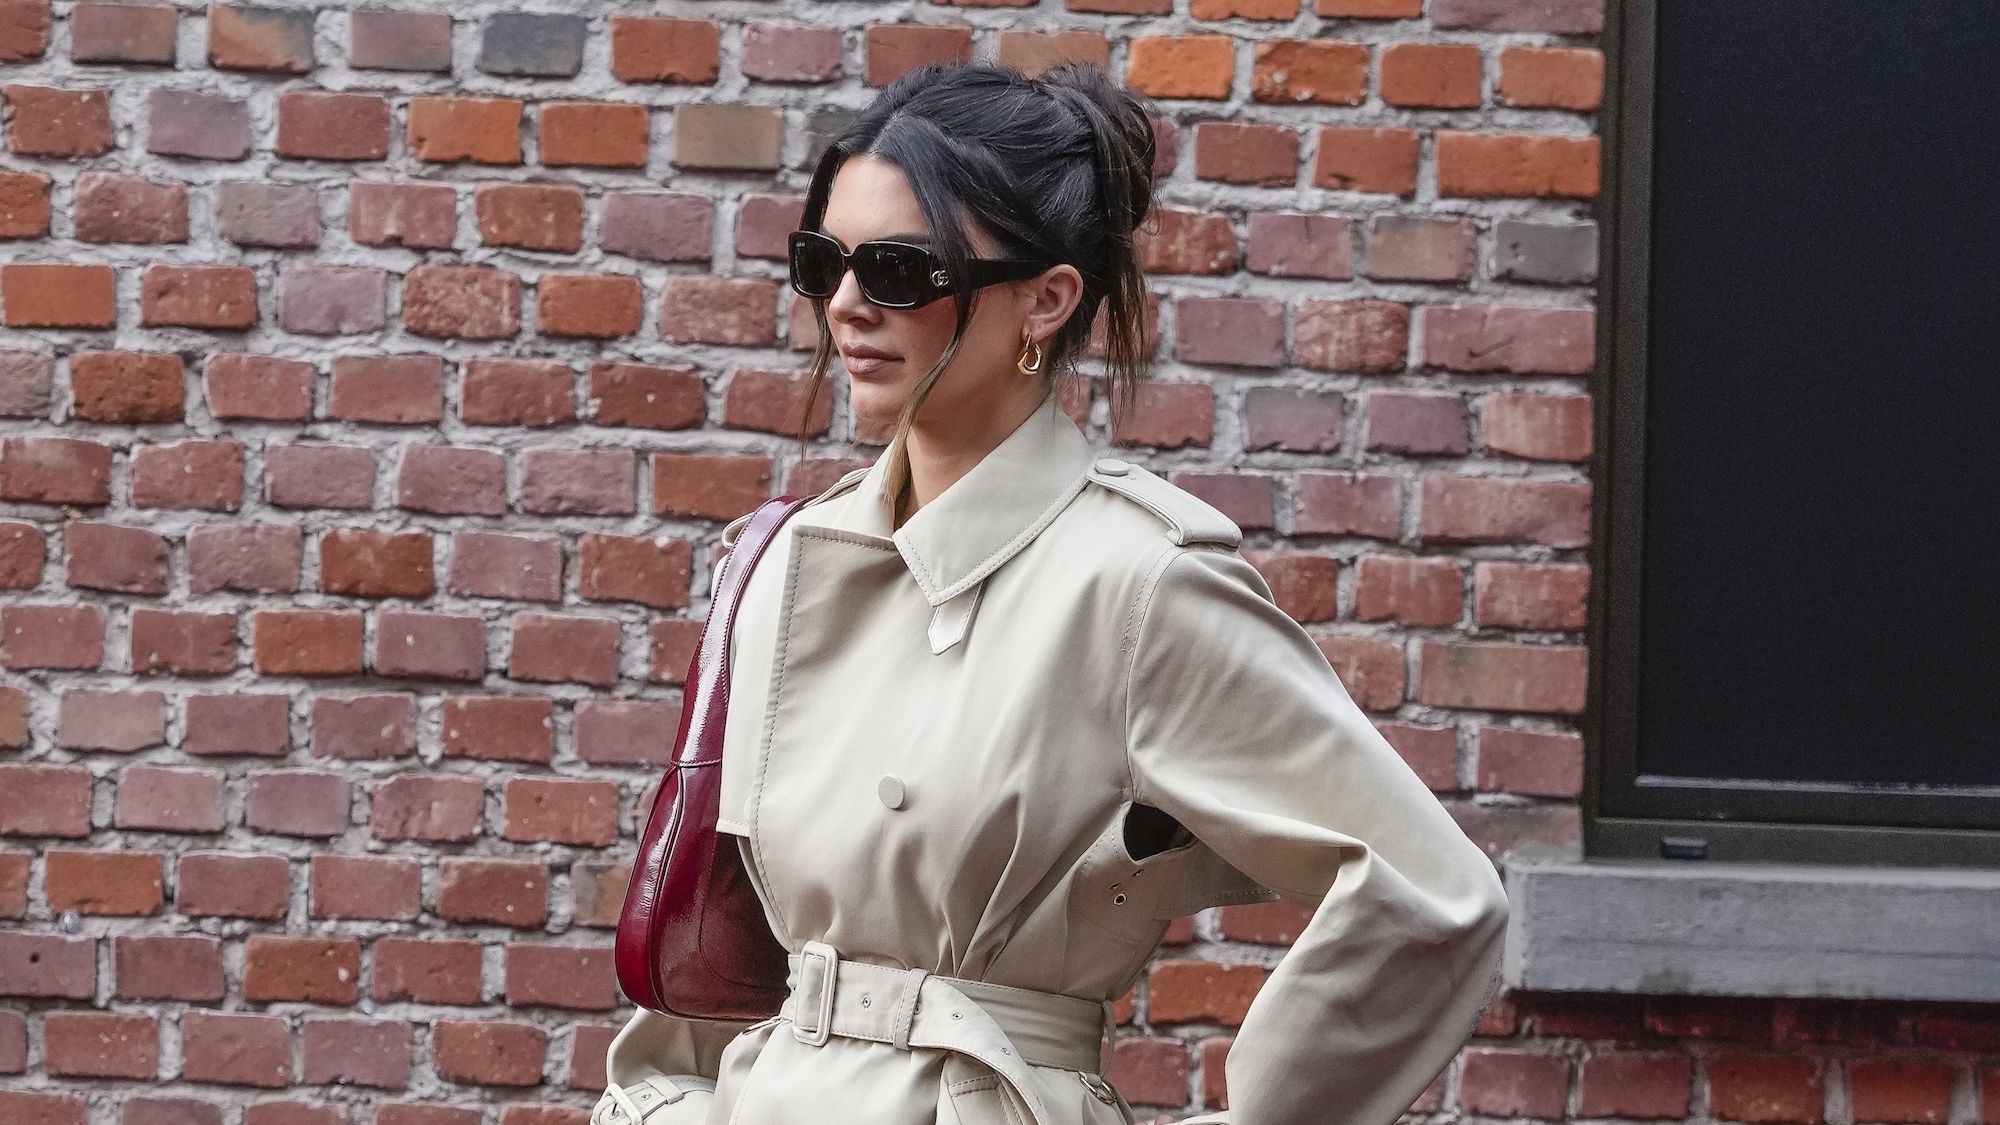 Kendall Jenner's Tiny Purse Is the Best Part of Her Outfit